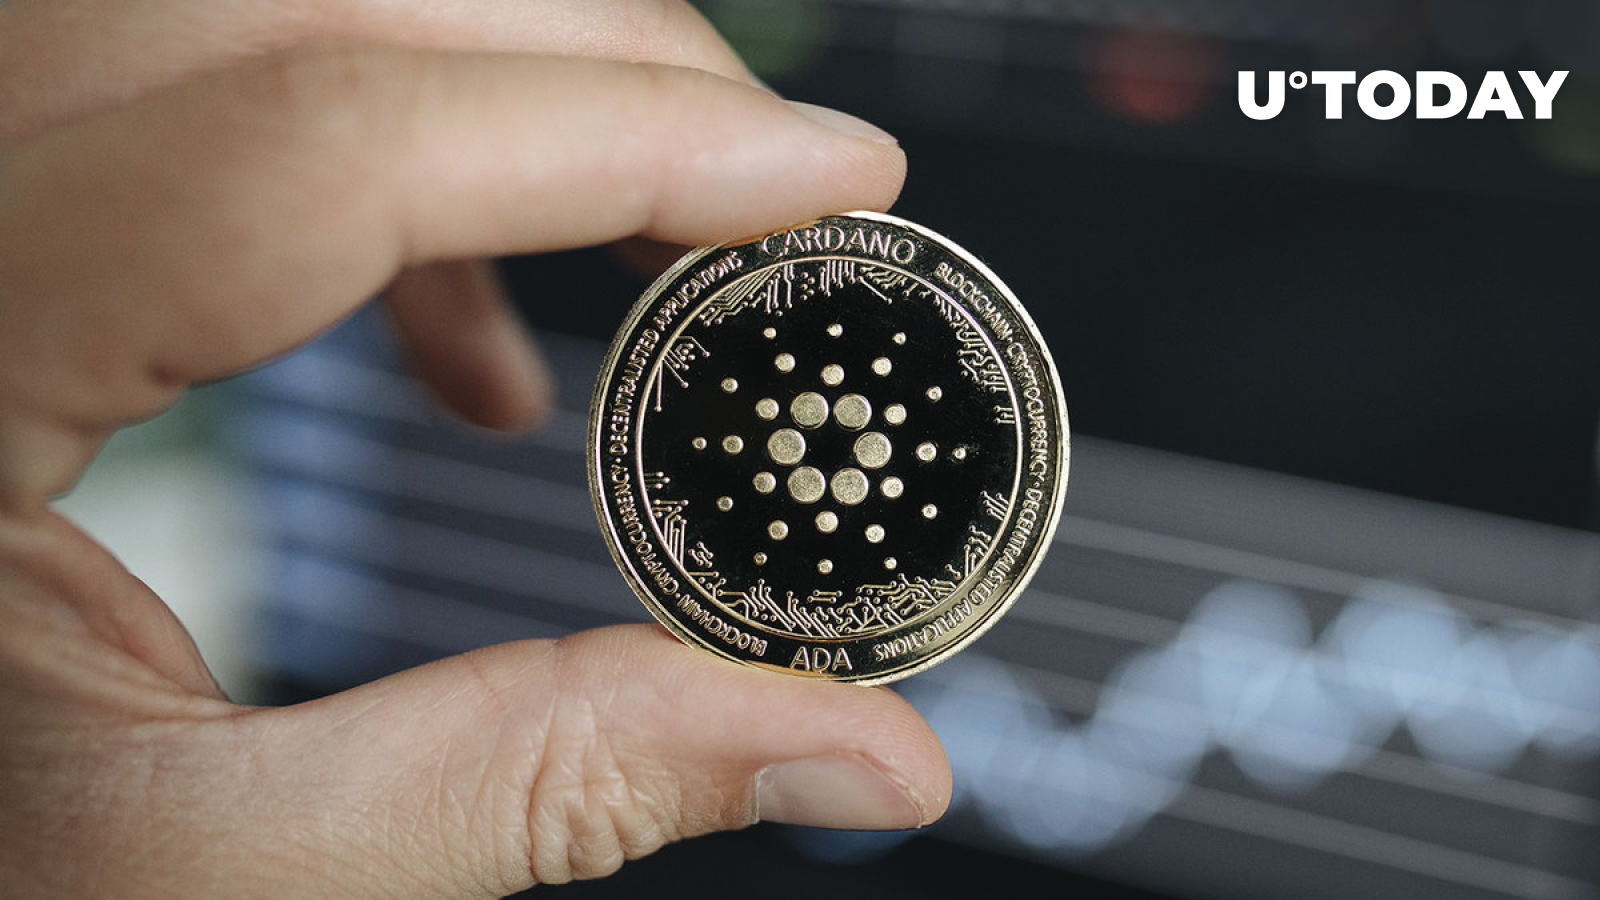 These Investors Buying Up Cardano (ADA) En Masse, What Is Their Plan?